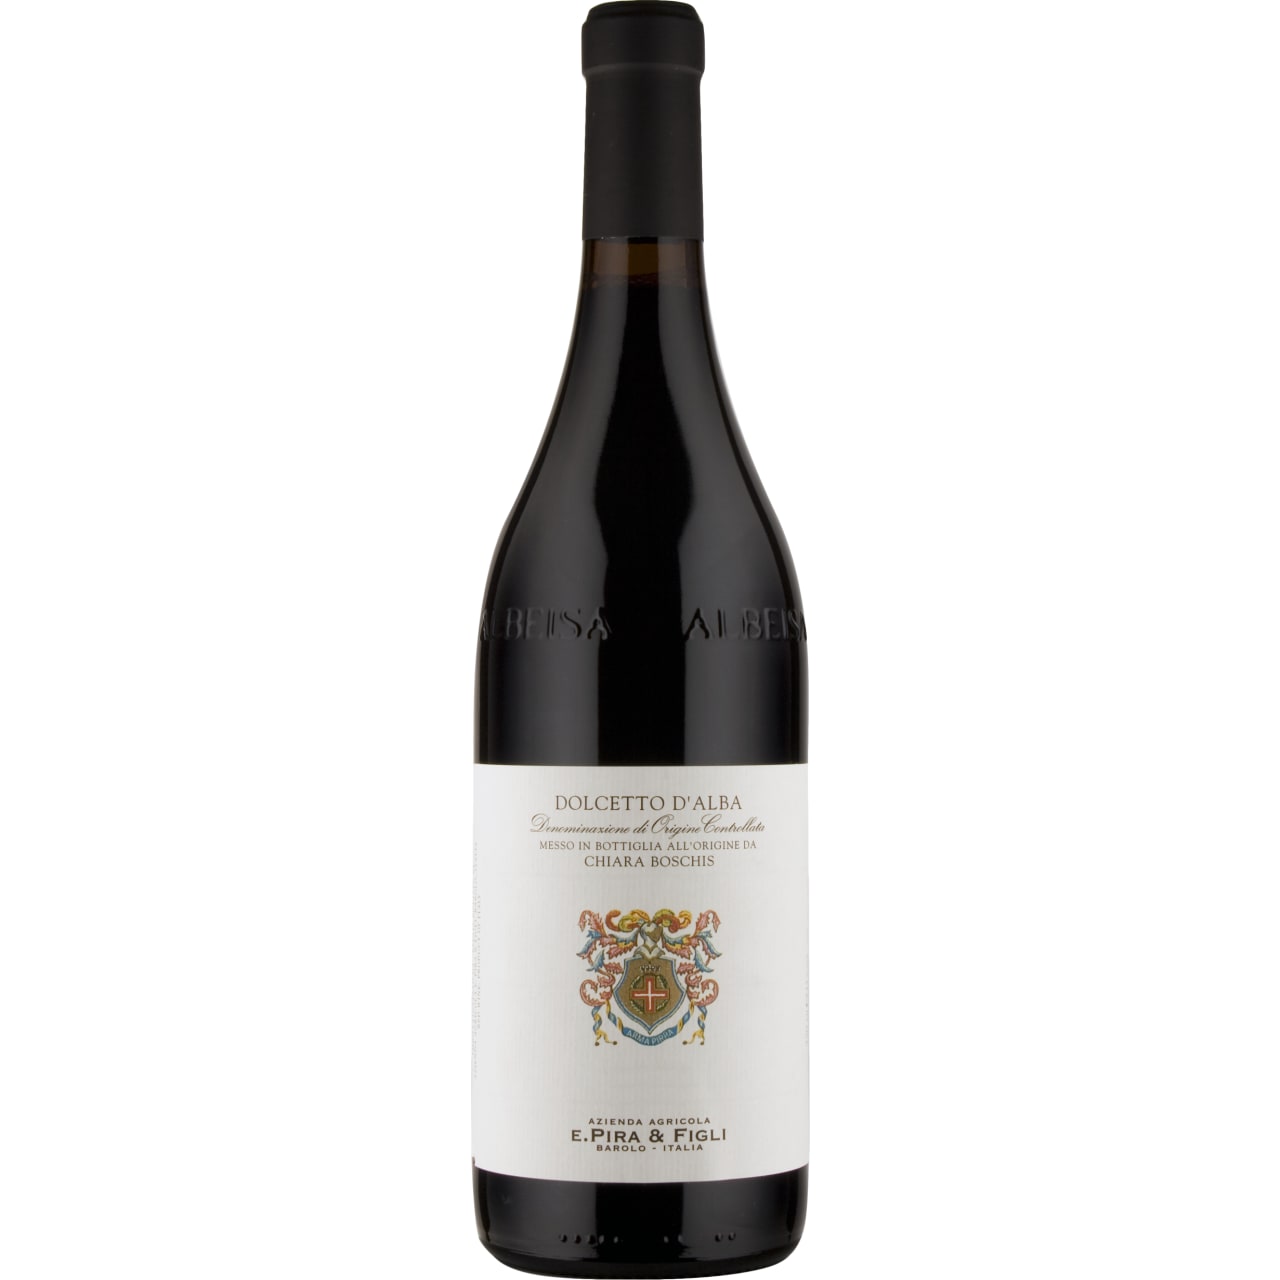 Charmingly seductive with soft tannins and aroma's of ripe blackberries and plums.